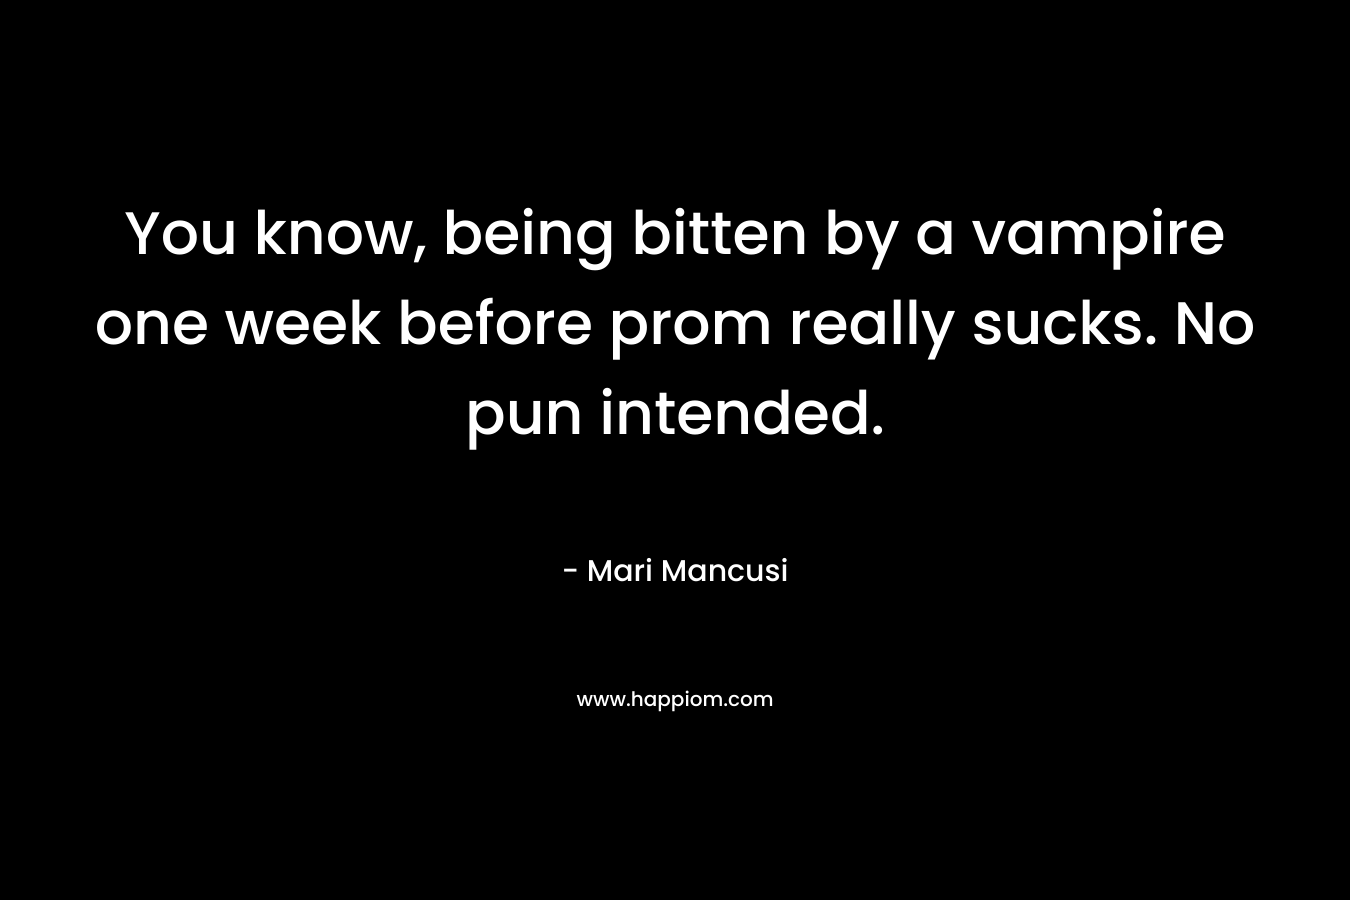 You know, being bitten by a vampire one week before prom really sucks.	No pun intended.